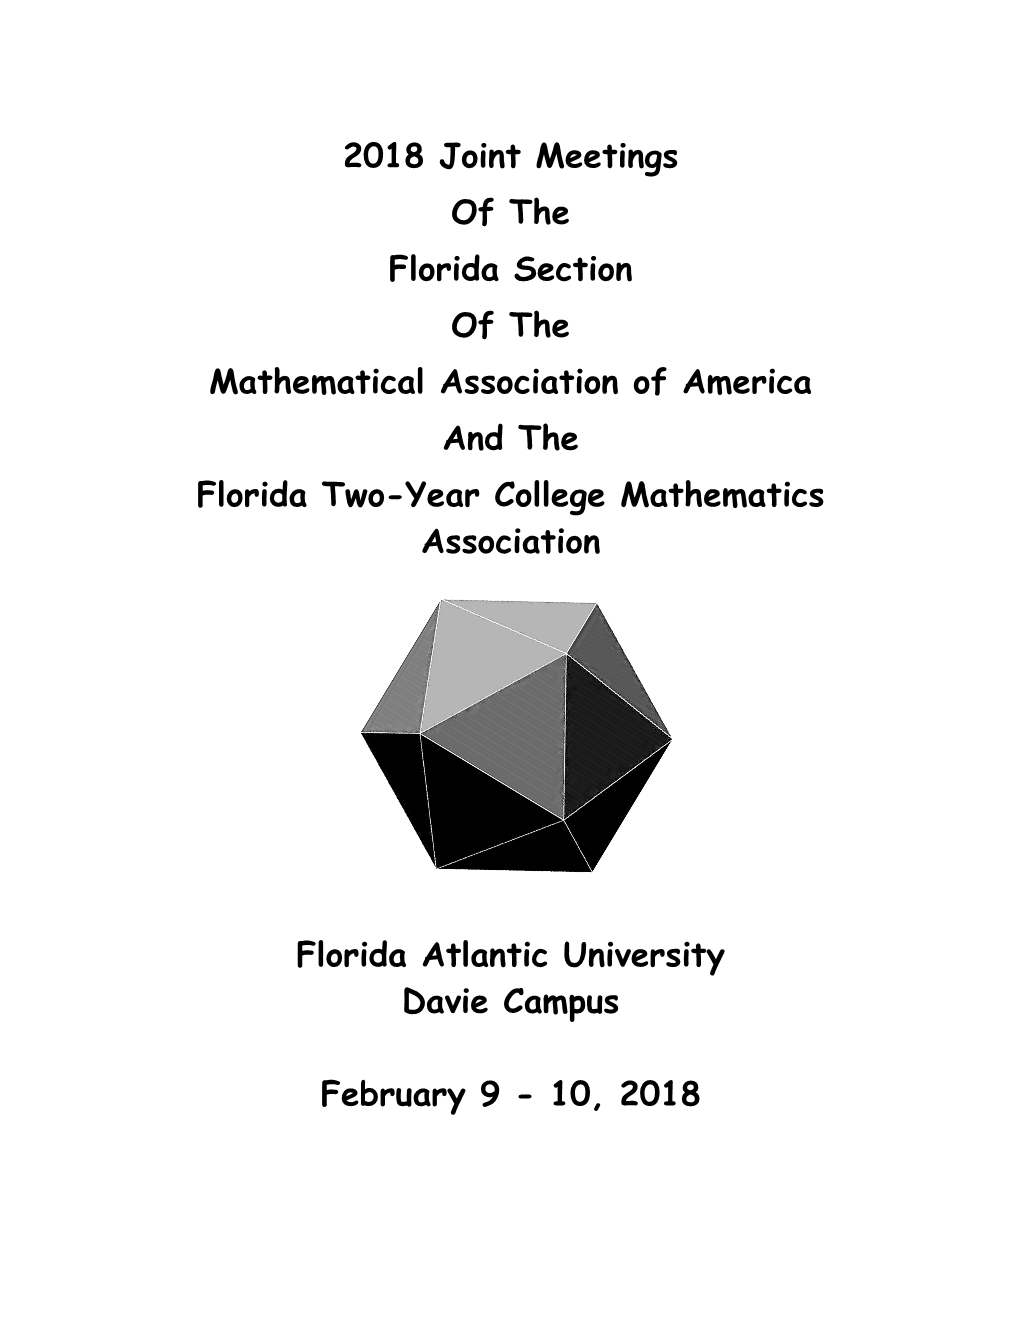 2018 Joint Meetings of the Florida Section of the Mathematical Association of America and the Florida Two-Year College Mathematics Association